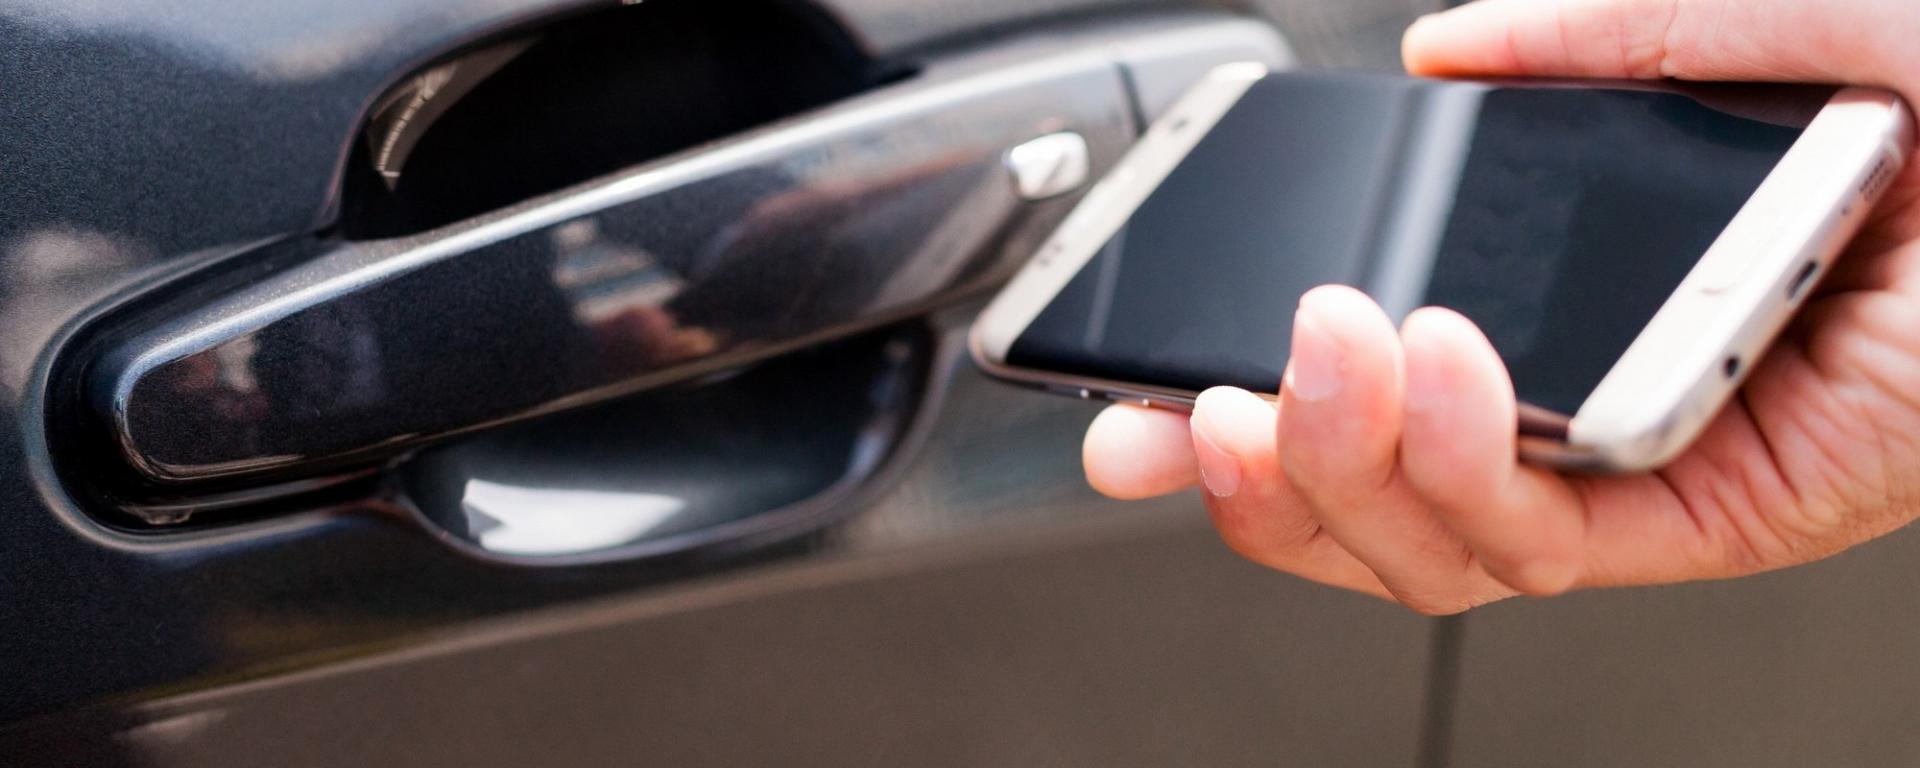 lost car's keys, open it with the smartphone